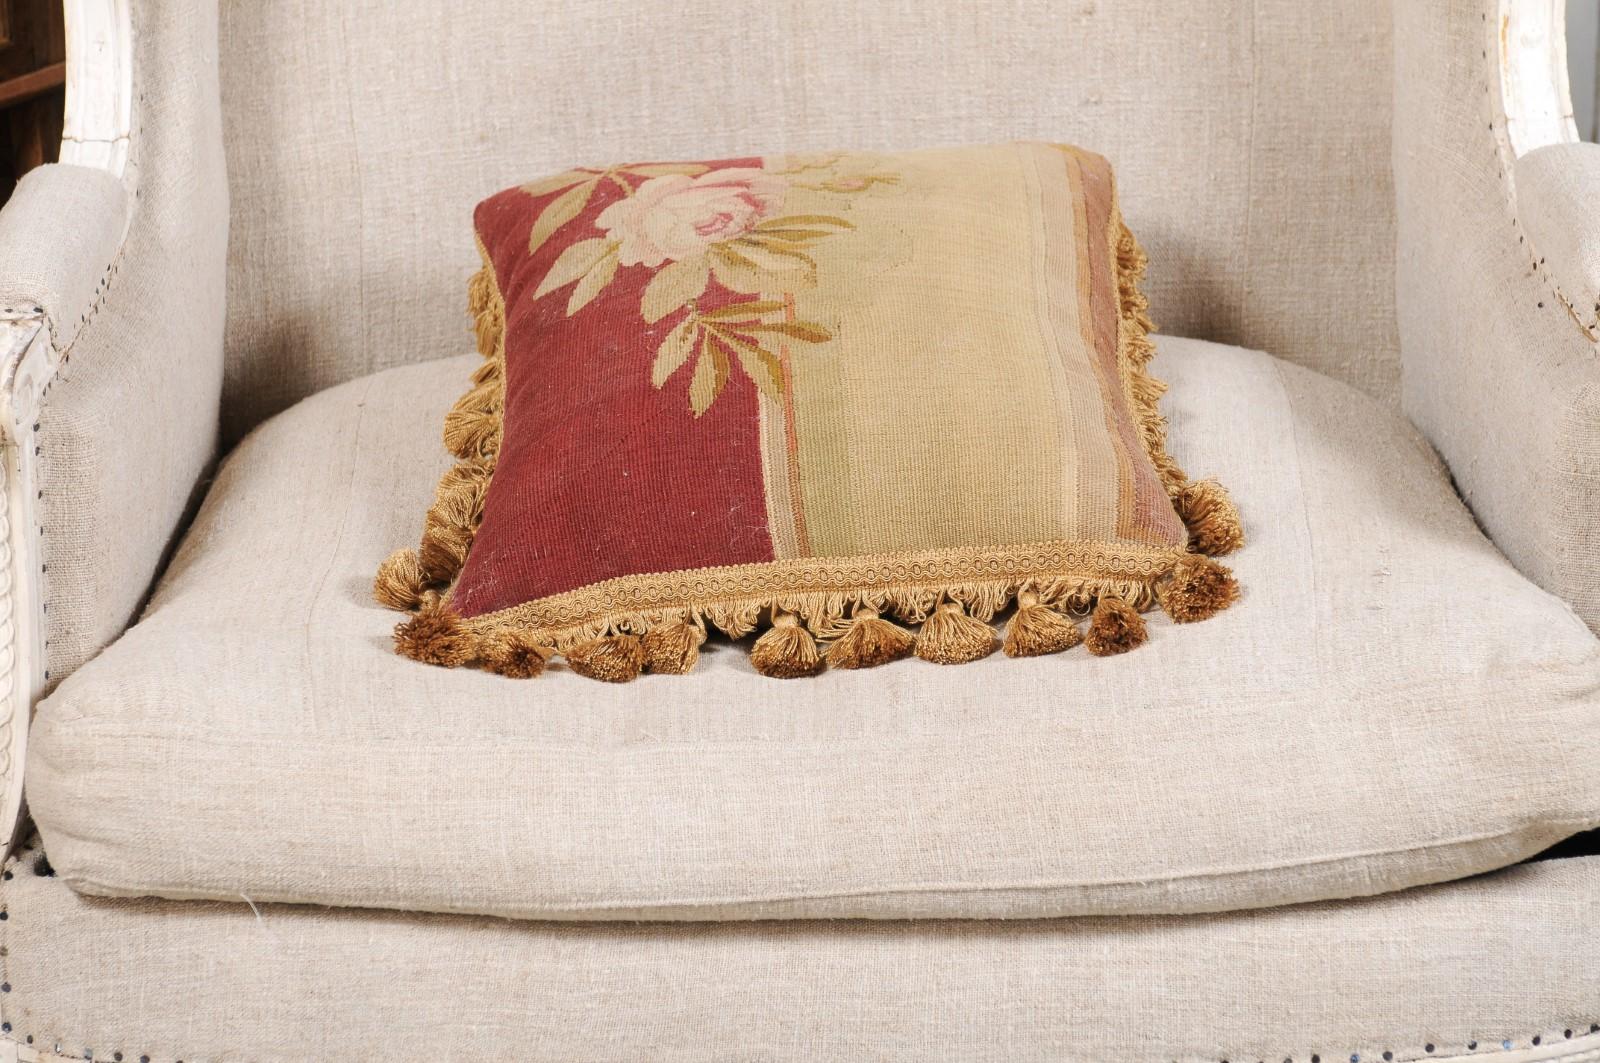 French 19th Century Aubusson Tapestry Pillow with Rose, Foliage and Tassels For Sale 8